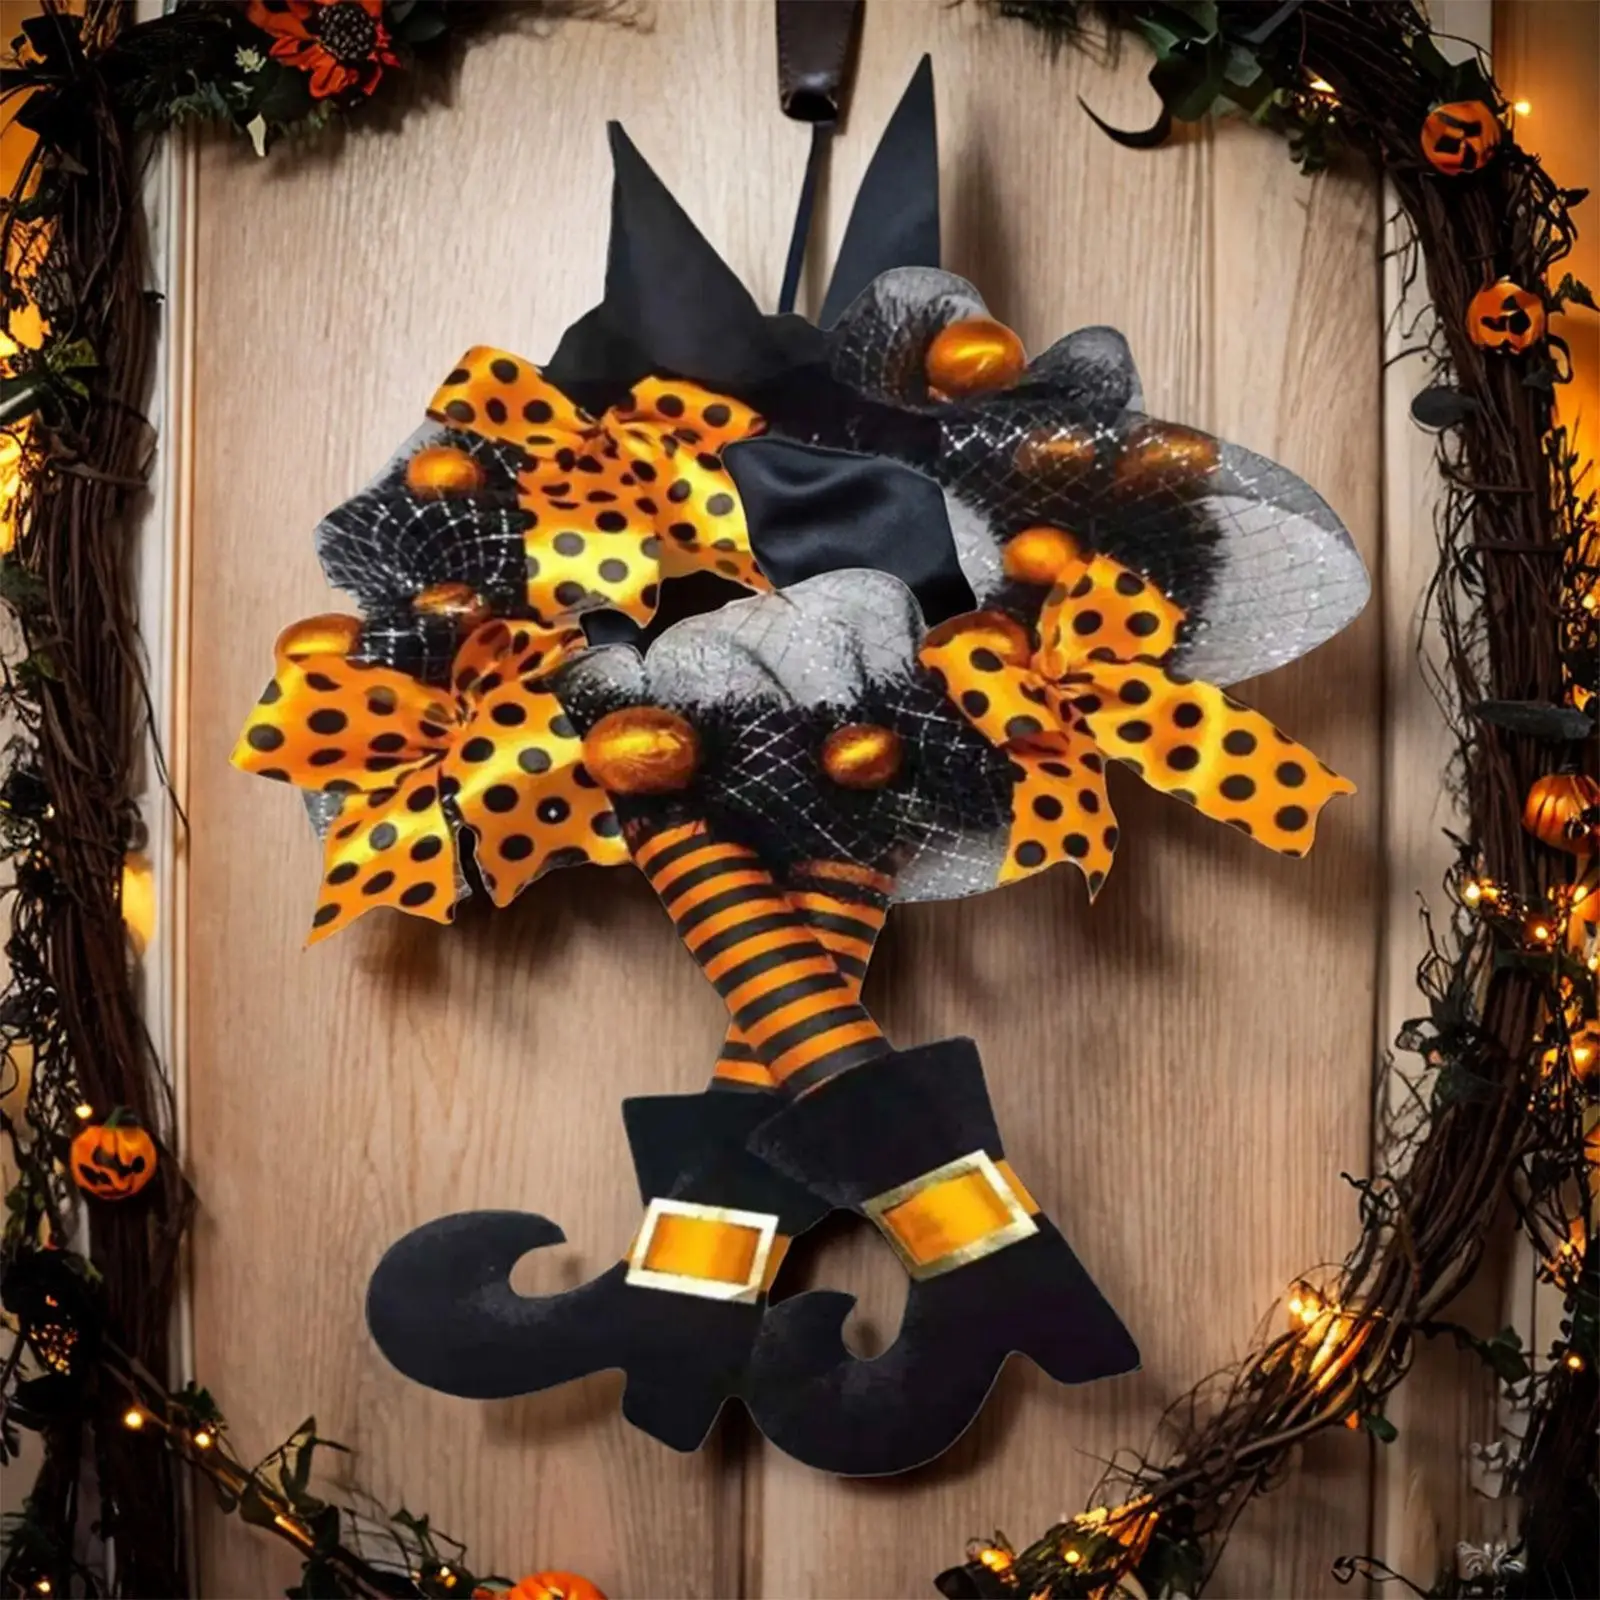 Happy Halloween Wreath for Front Door with Ribbon Ornaments with Bowknot Decorative Wreath for Wall Porch Door Home Decoration